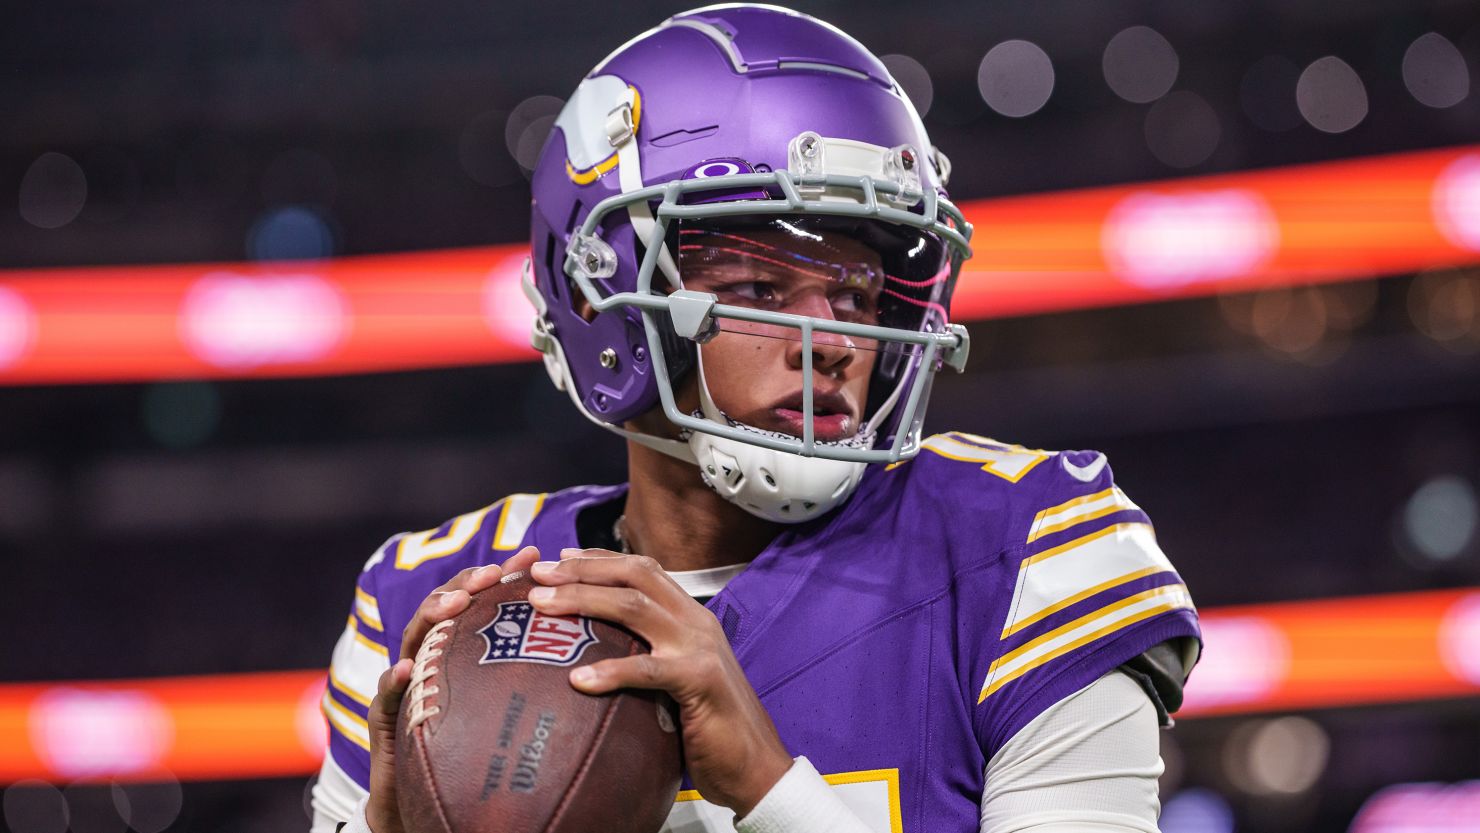 MINNEAPOLIS, MINNESOTA - NOVEMBER 27: Quarterback Joshua Dobbs #15 of the Minnesota Vikings warms up prior to an NFL football game against the Chicago Bears at U.S. Bank Stadium on November 27, 2023 in Minneapolis, Minnesota. (Photo by Todd Rosenberg/Getty Images) (Green Bay Packers)